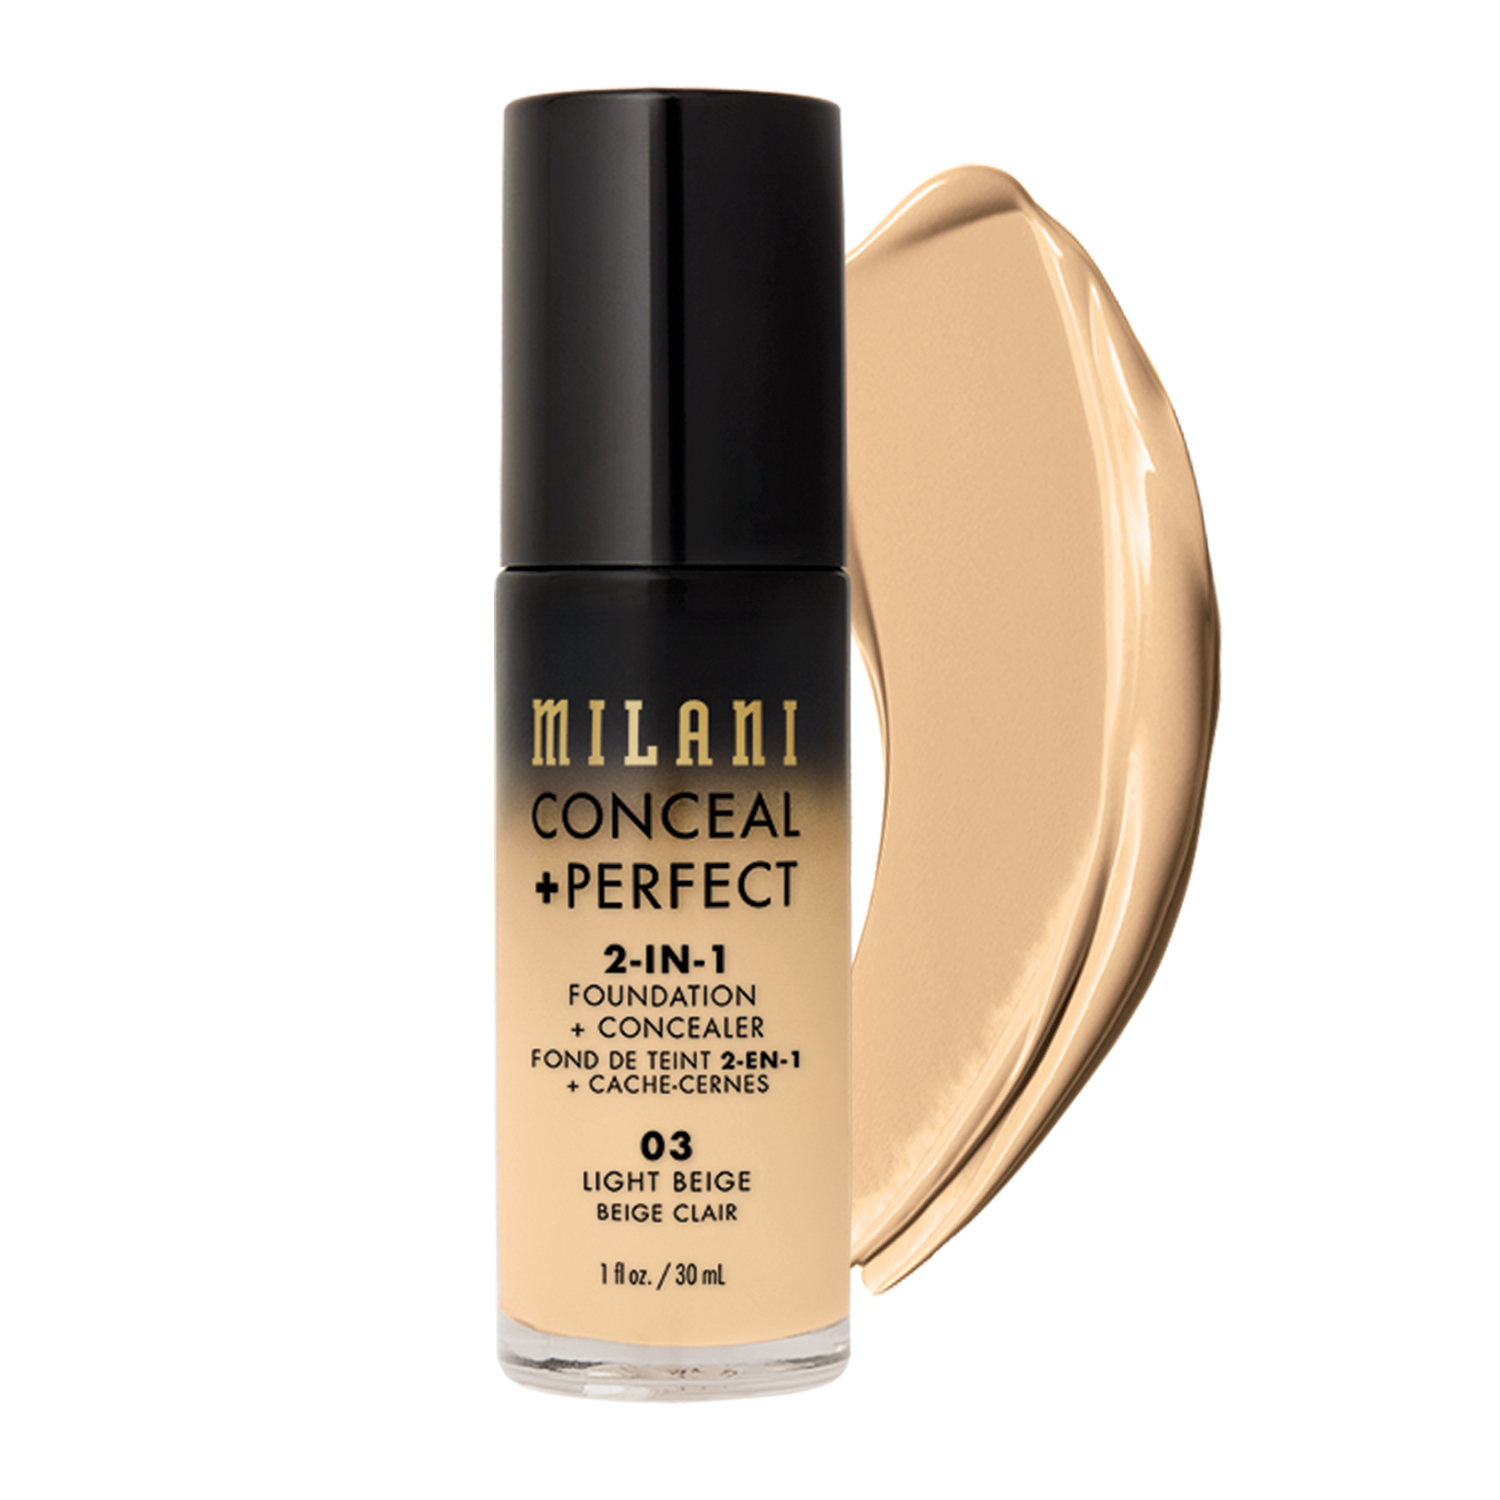 Milani Conceal + Perfect 2-in-1 Foundation + Concealer-03 Light Beige